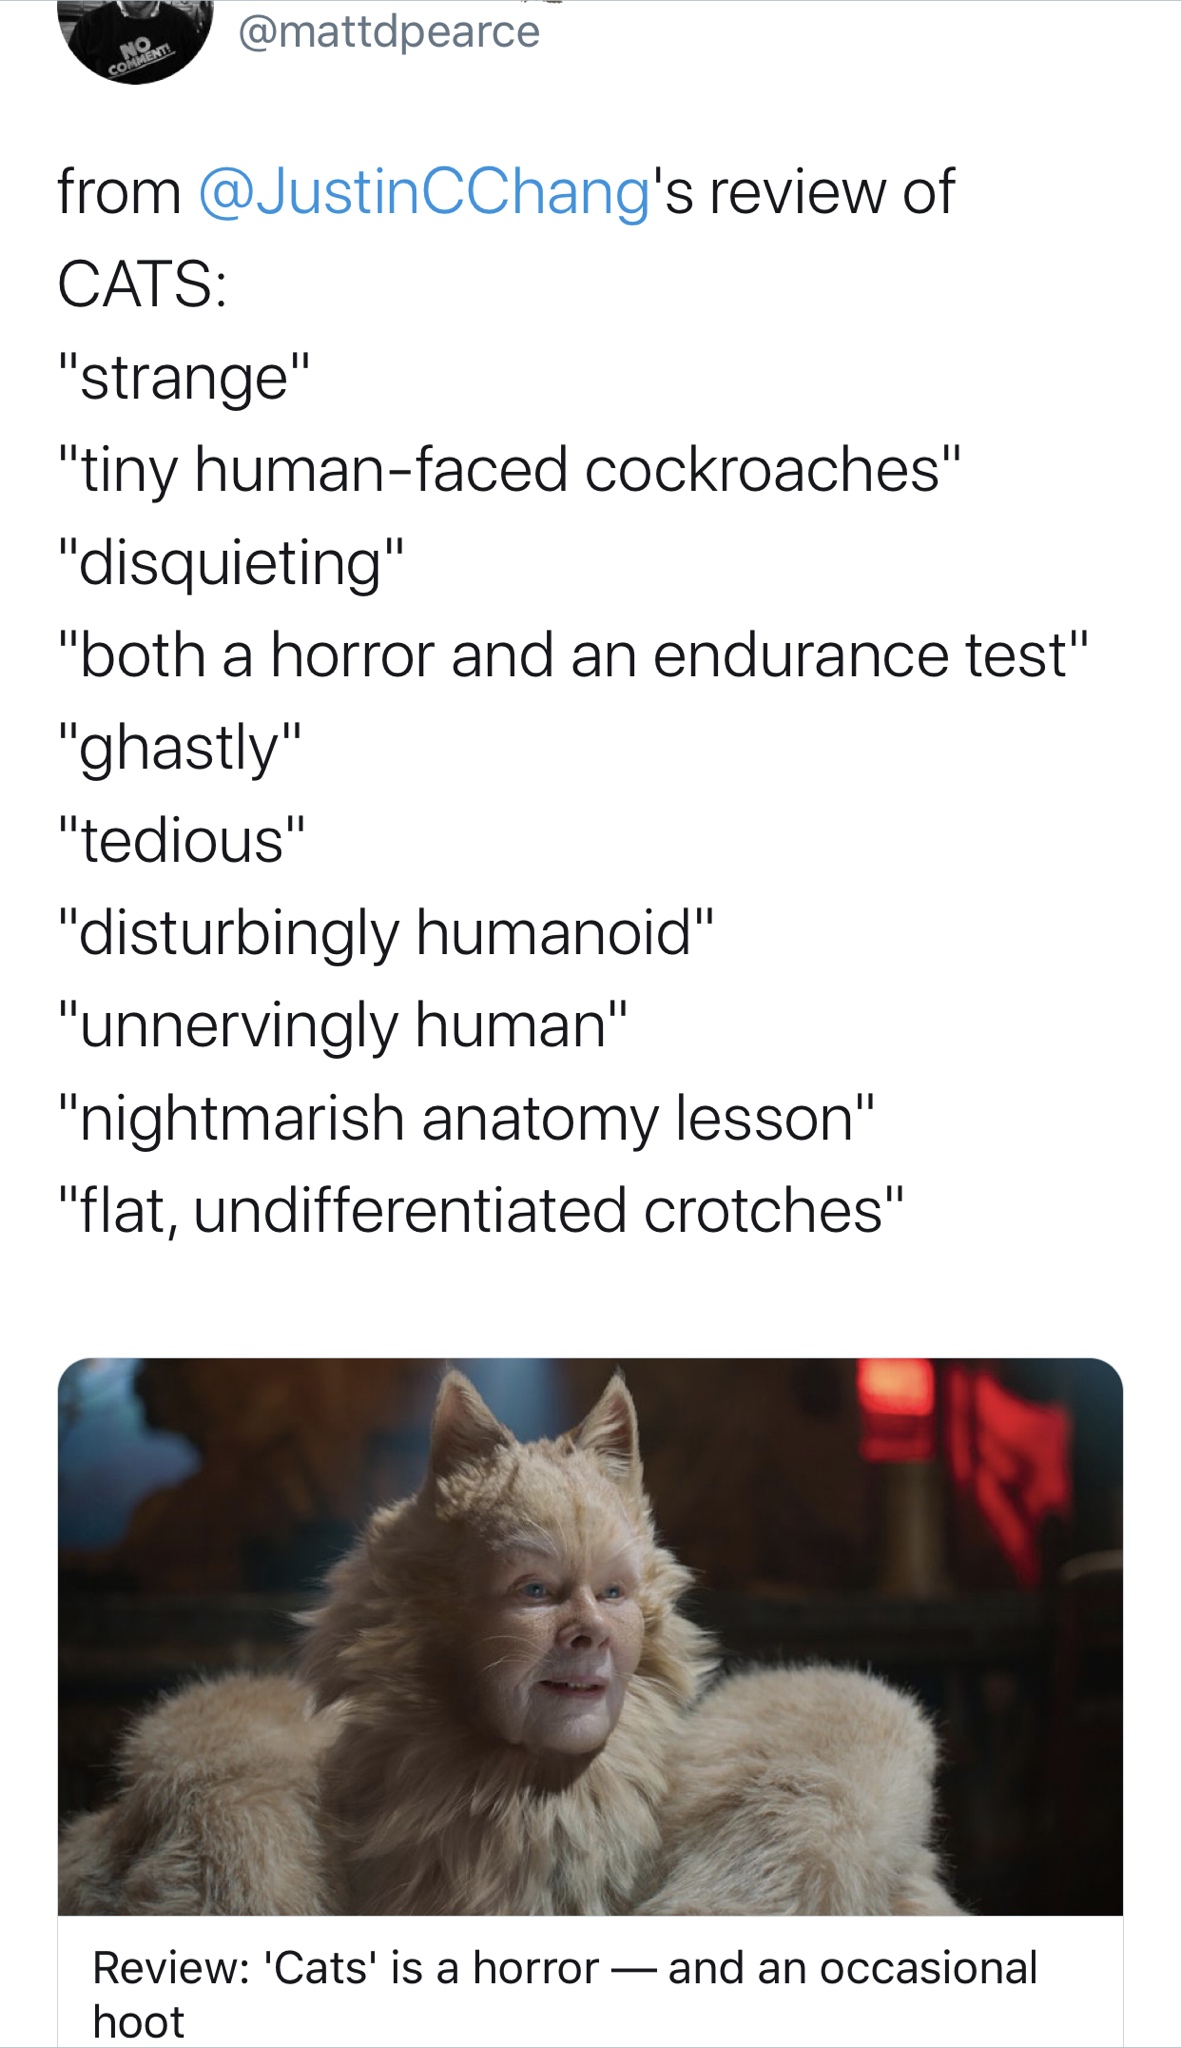 photo caption - from 's review of Cats "strange" "tiny humanfaced cockroaches" "disquieting" "both a horror and an endurance test" "ghastly" "tedious" "disturbingly humanoid" "unnervingly human" "nightmarish anatomy lesson" "flat, undifferentiated crotche